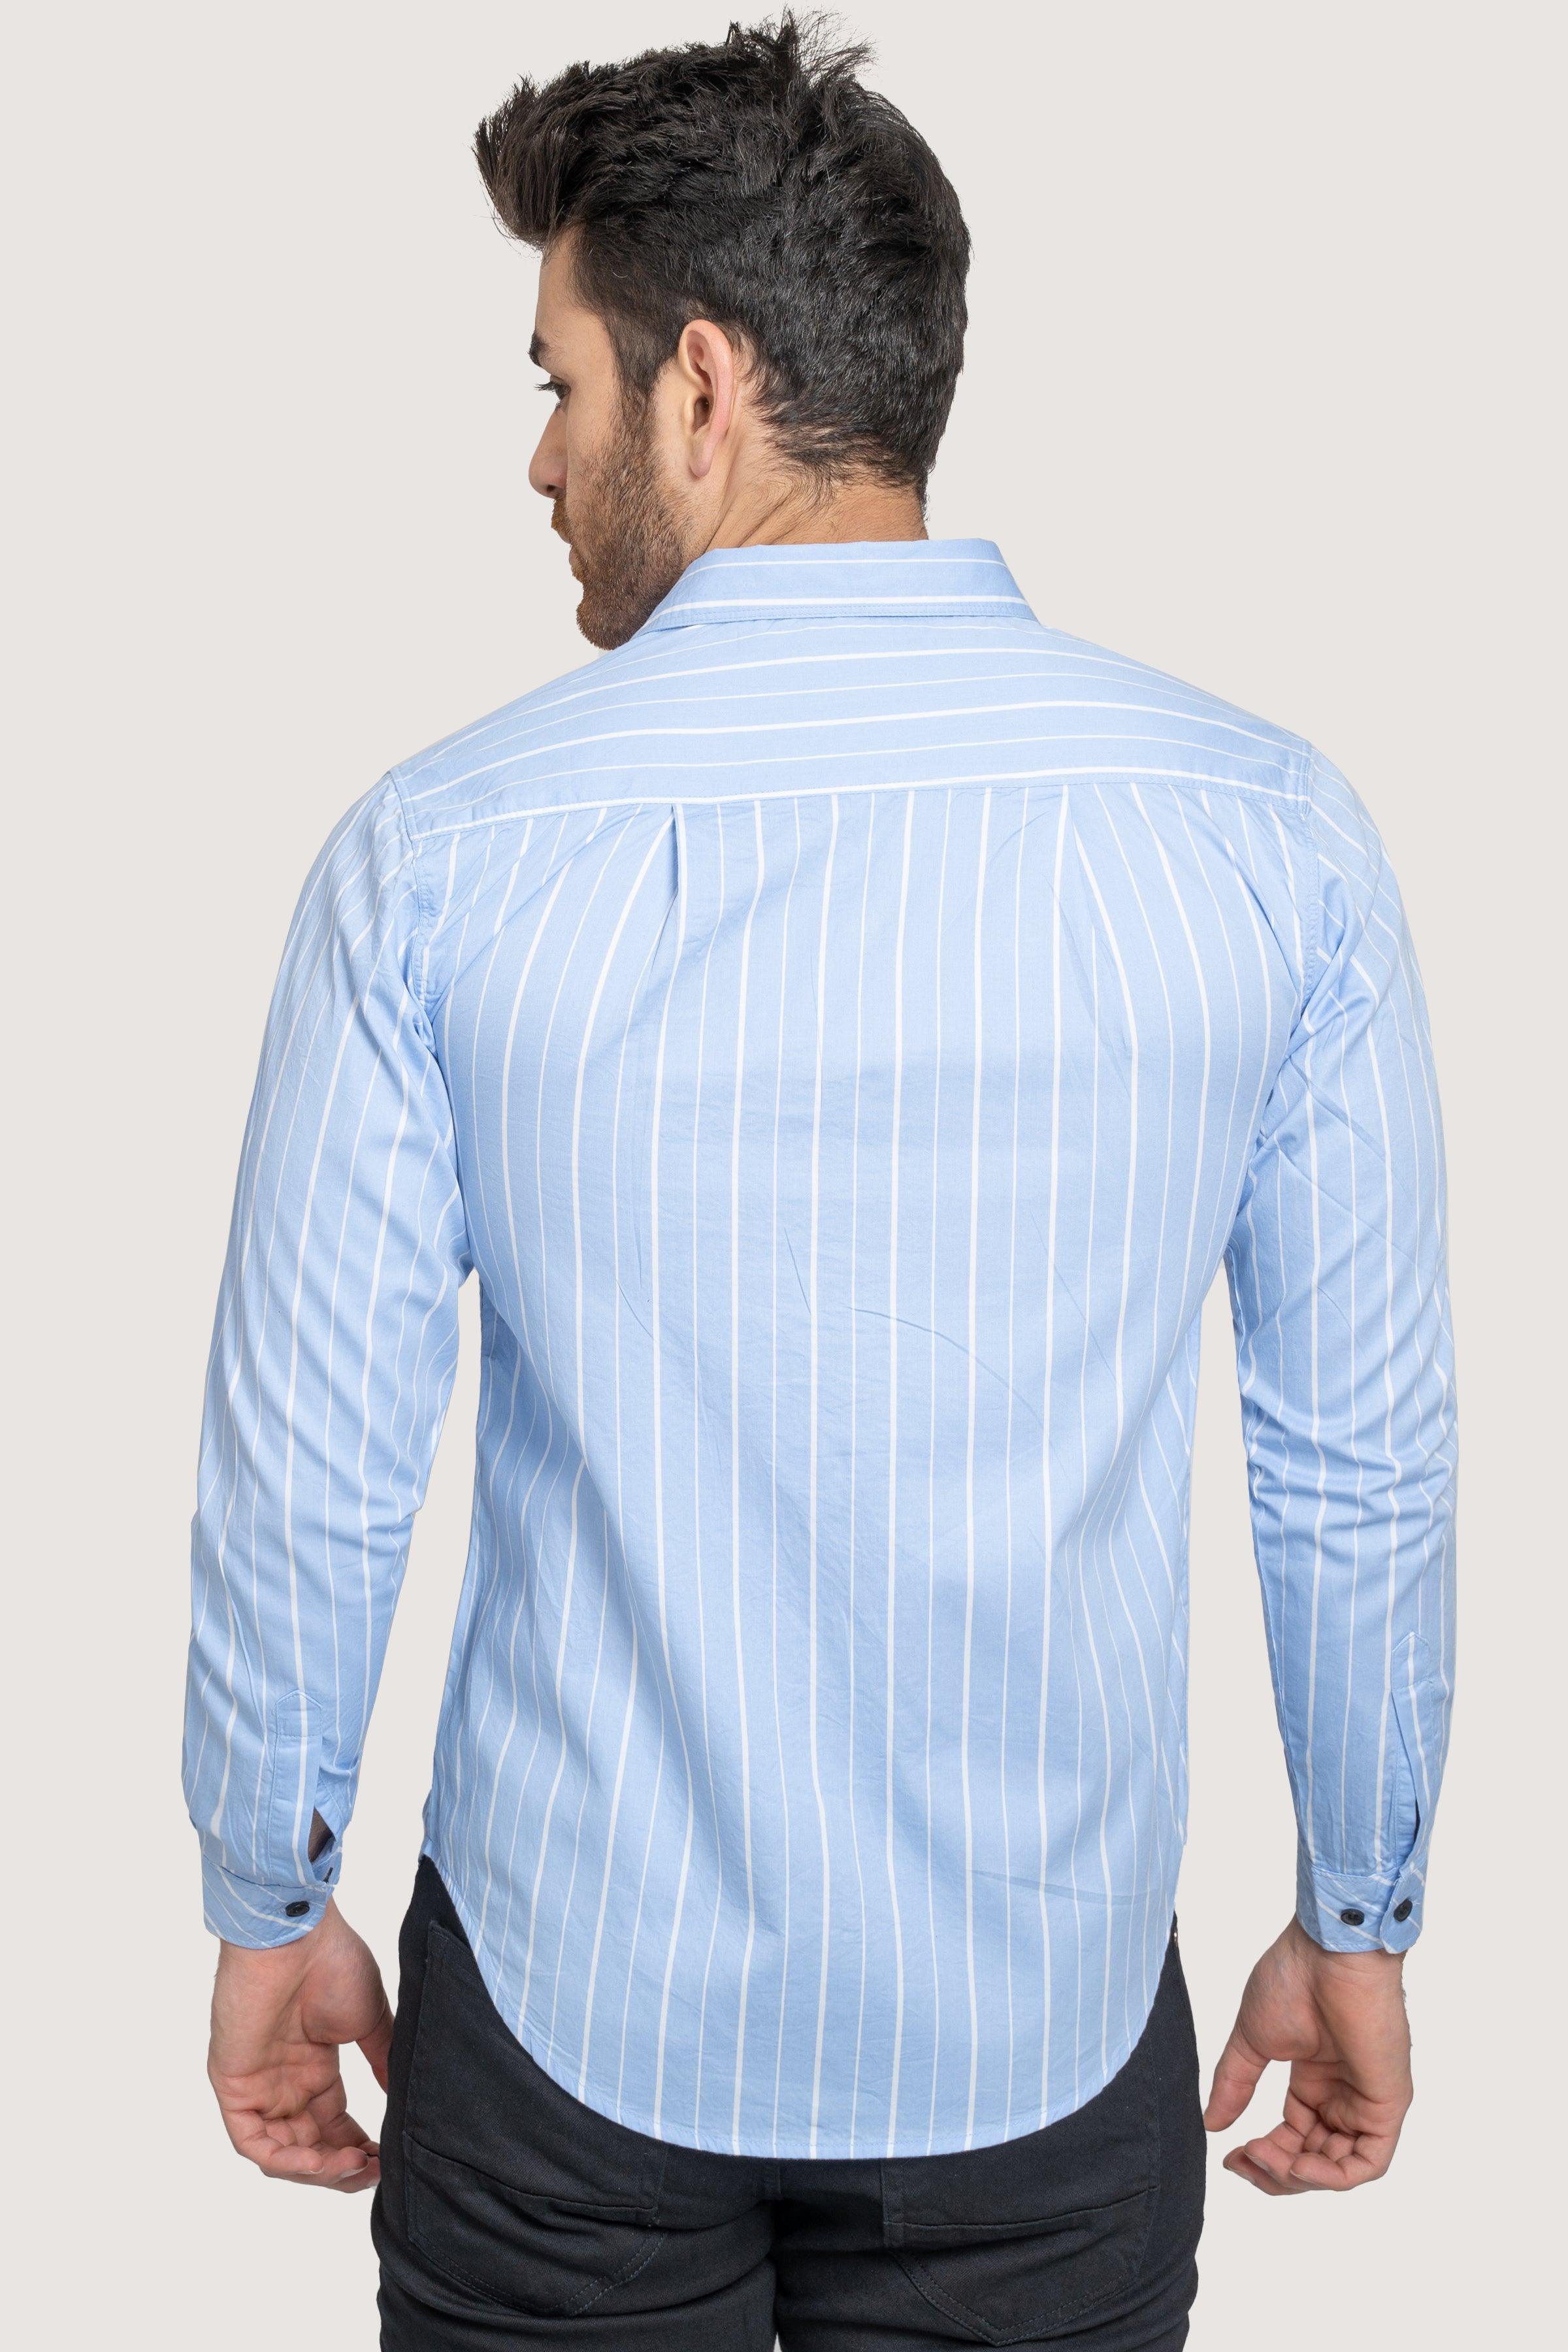 CASUAL SHIRT SKY BLUE STRIPES at Charcoal Clothing